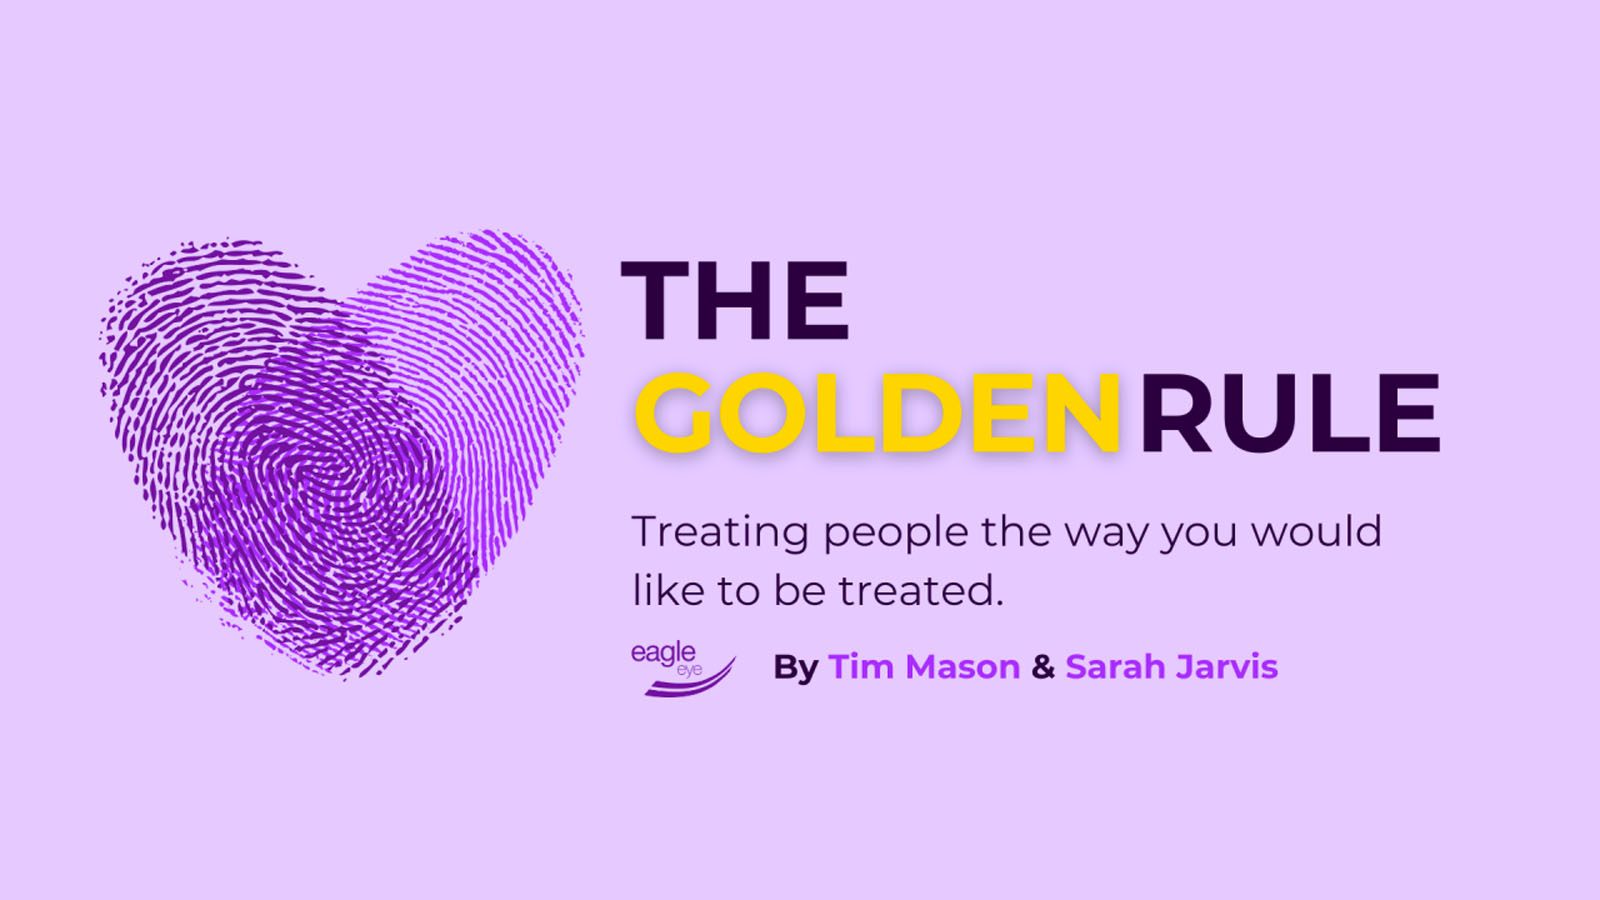 Blog #1: Embracing the Timeless Wisdom of the Golden Rule